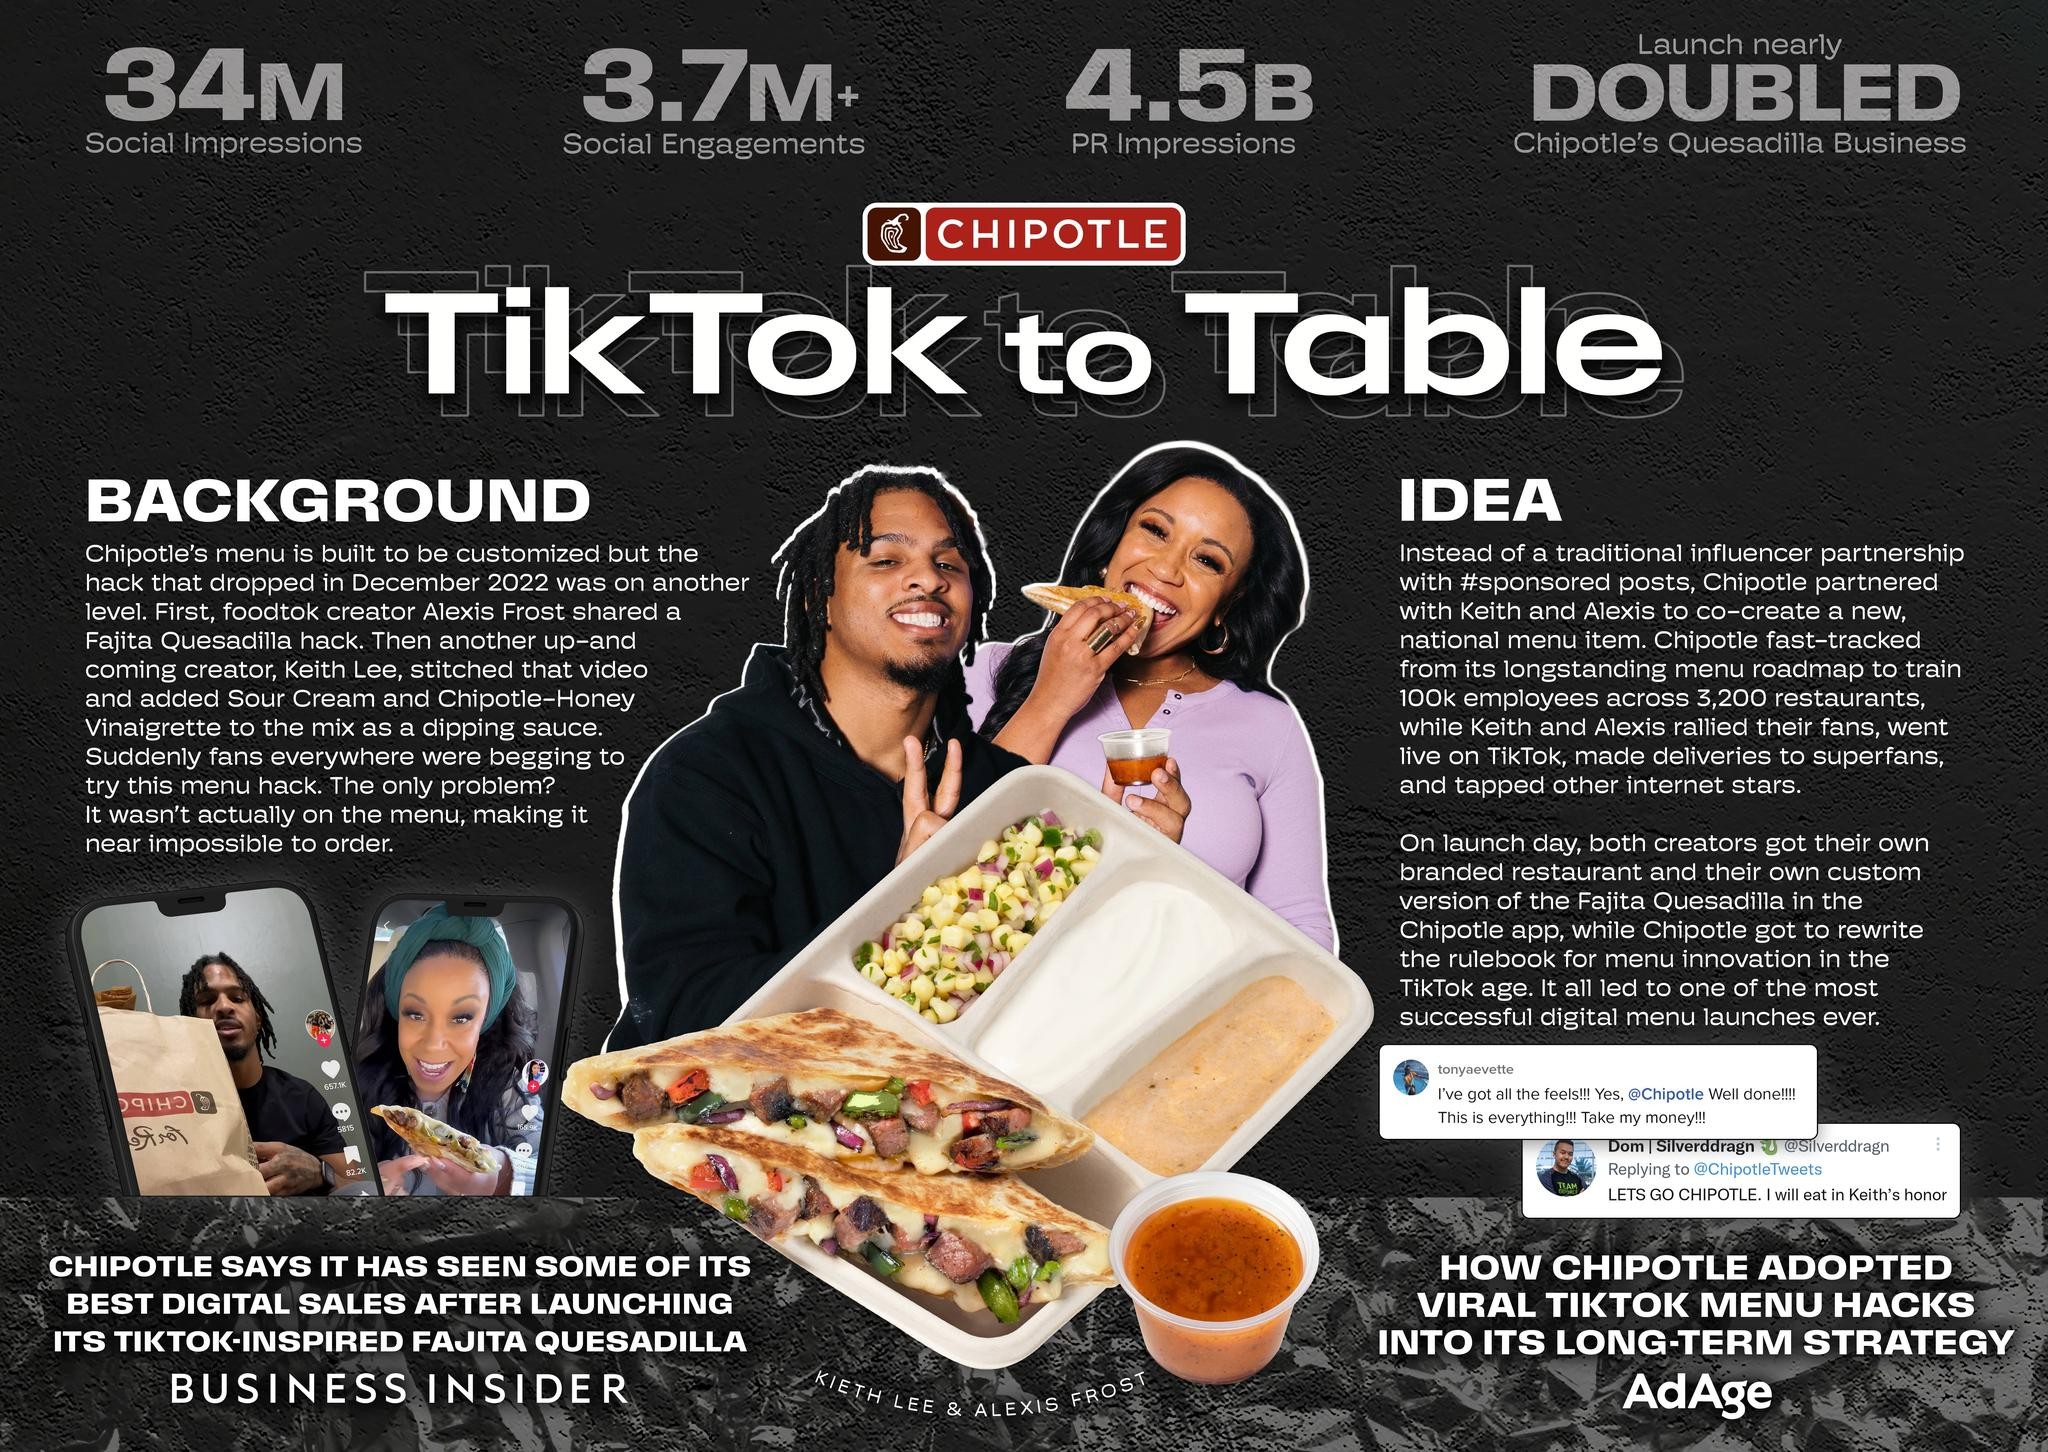 Chipotle: From TikTok to Table 